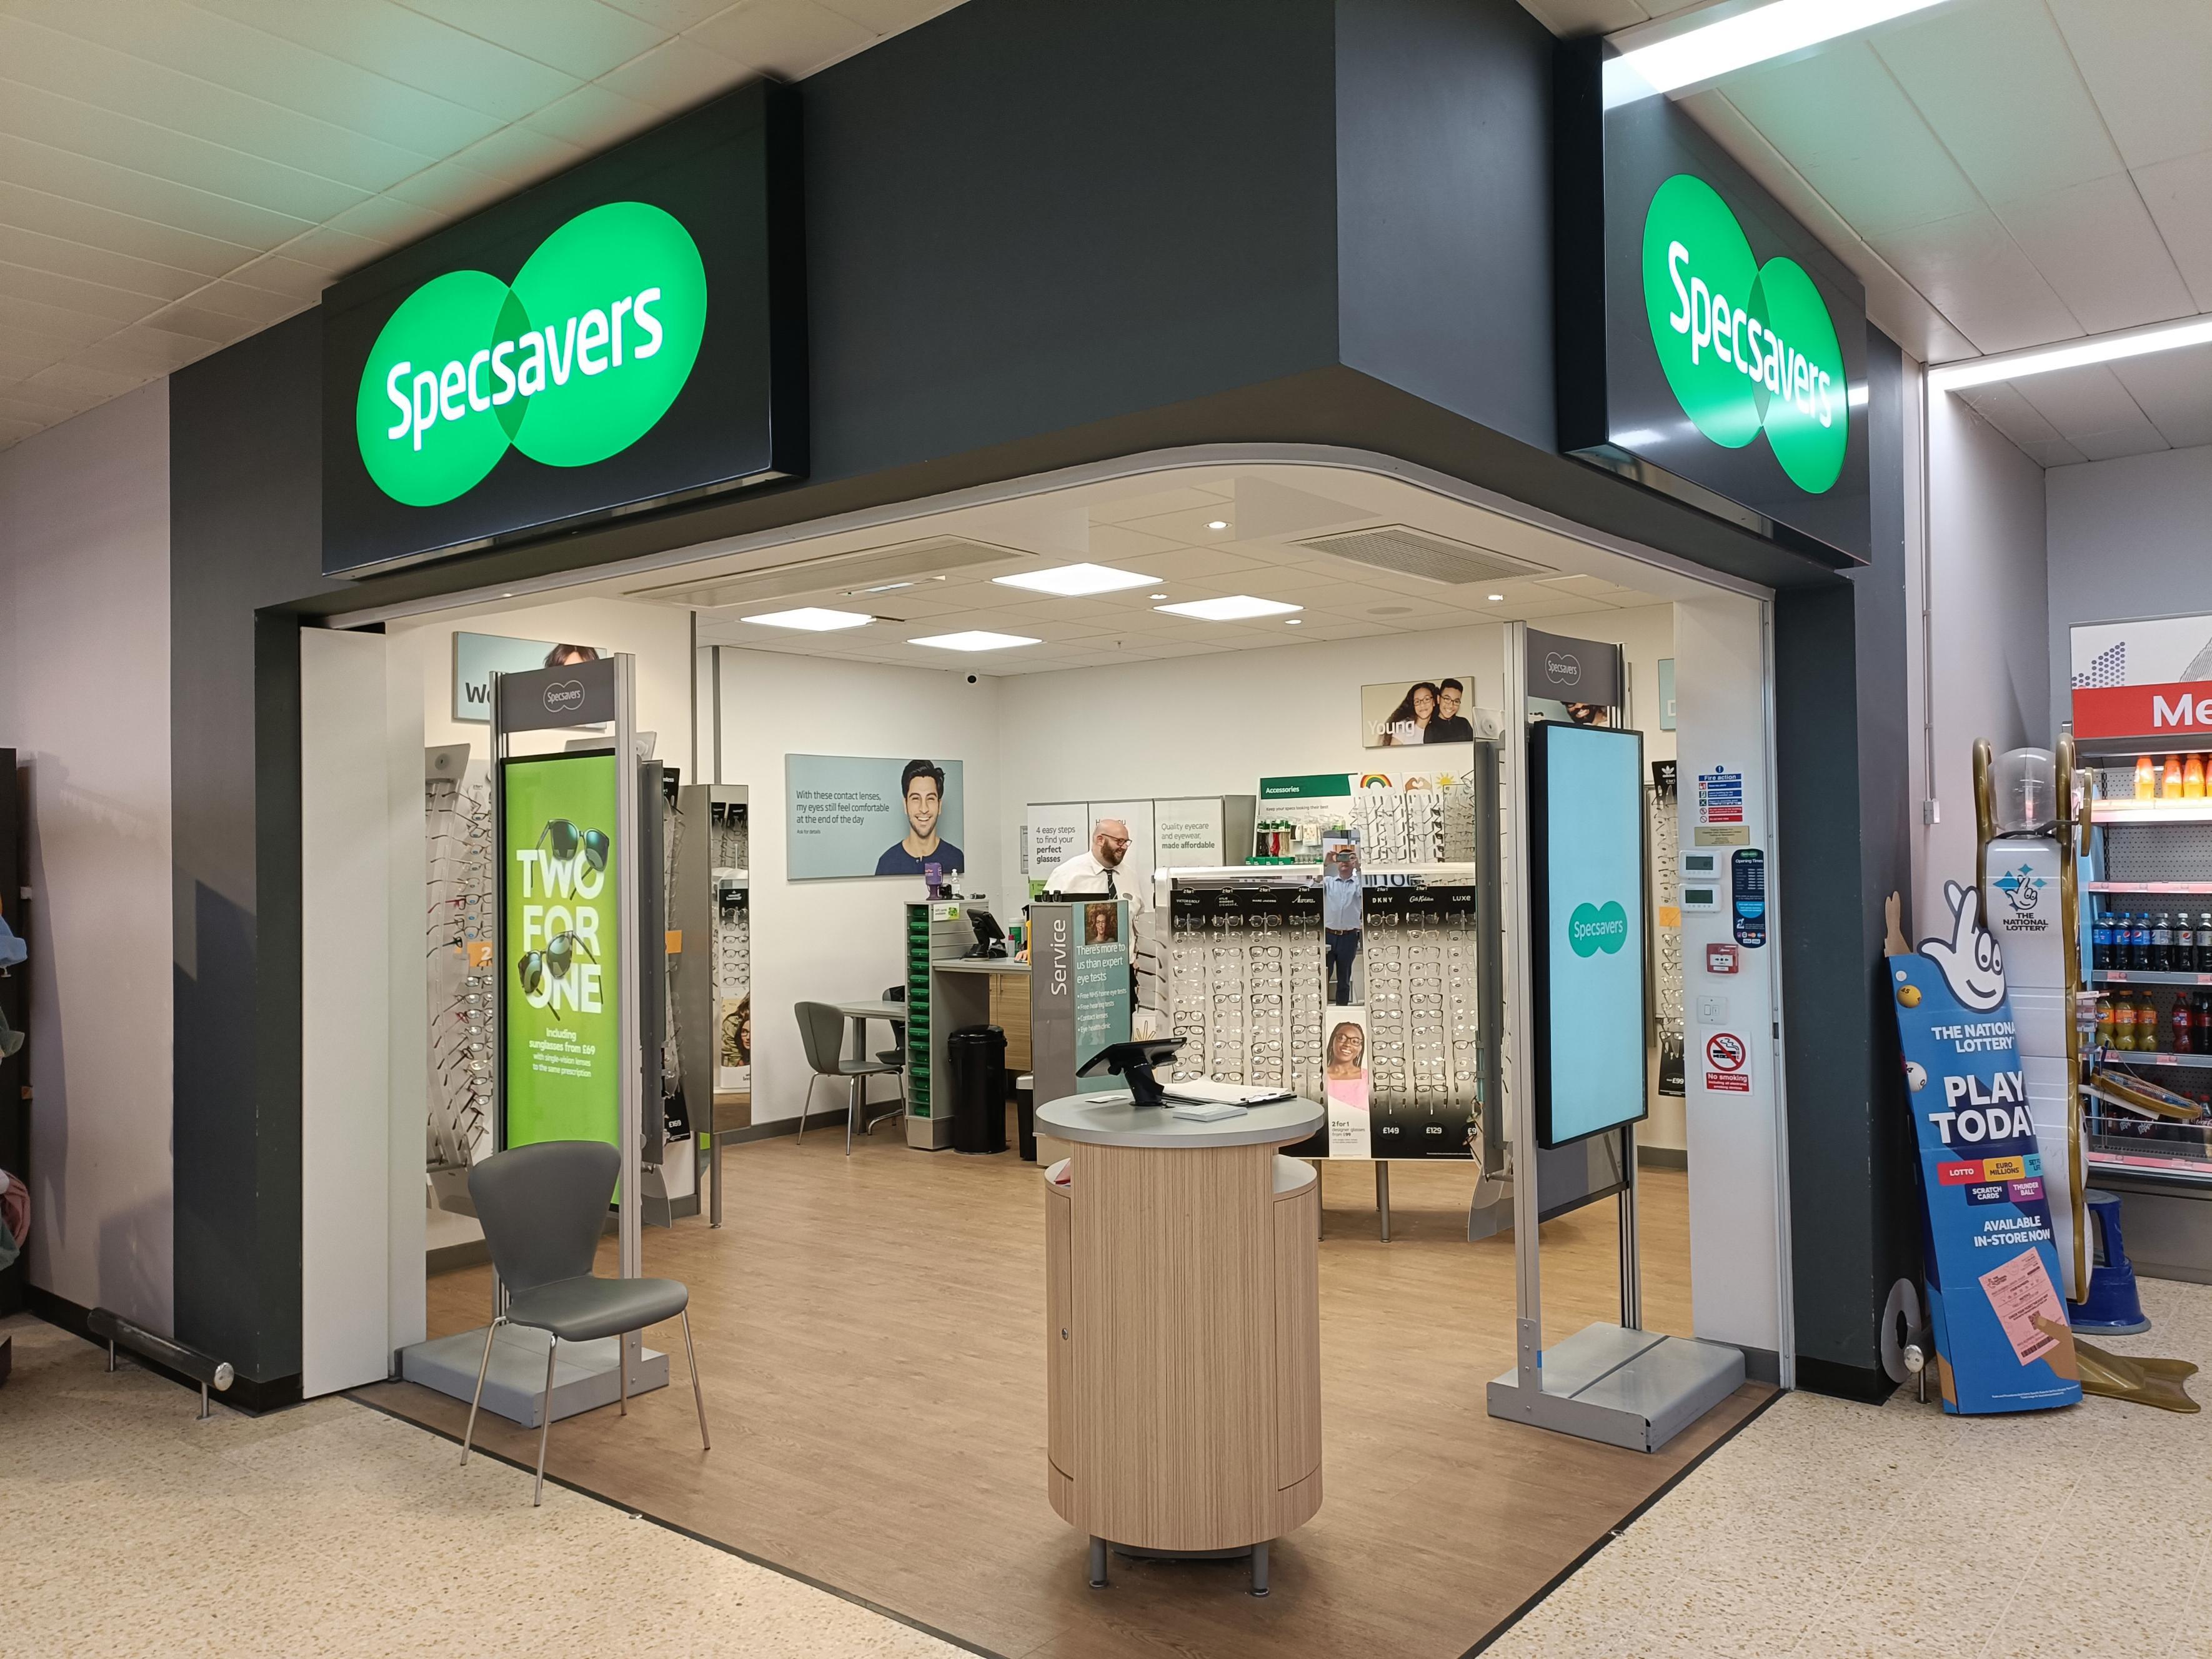 Images Specsavers Opticians and Audiologists - Cheshire Oaks Sainsbury's